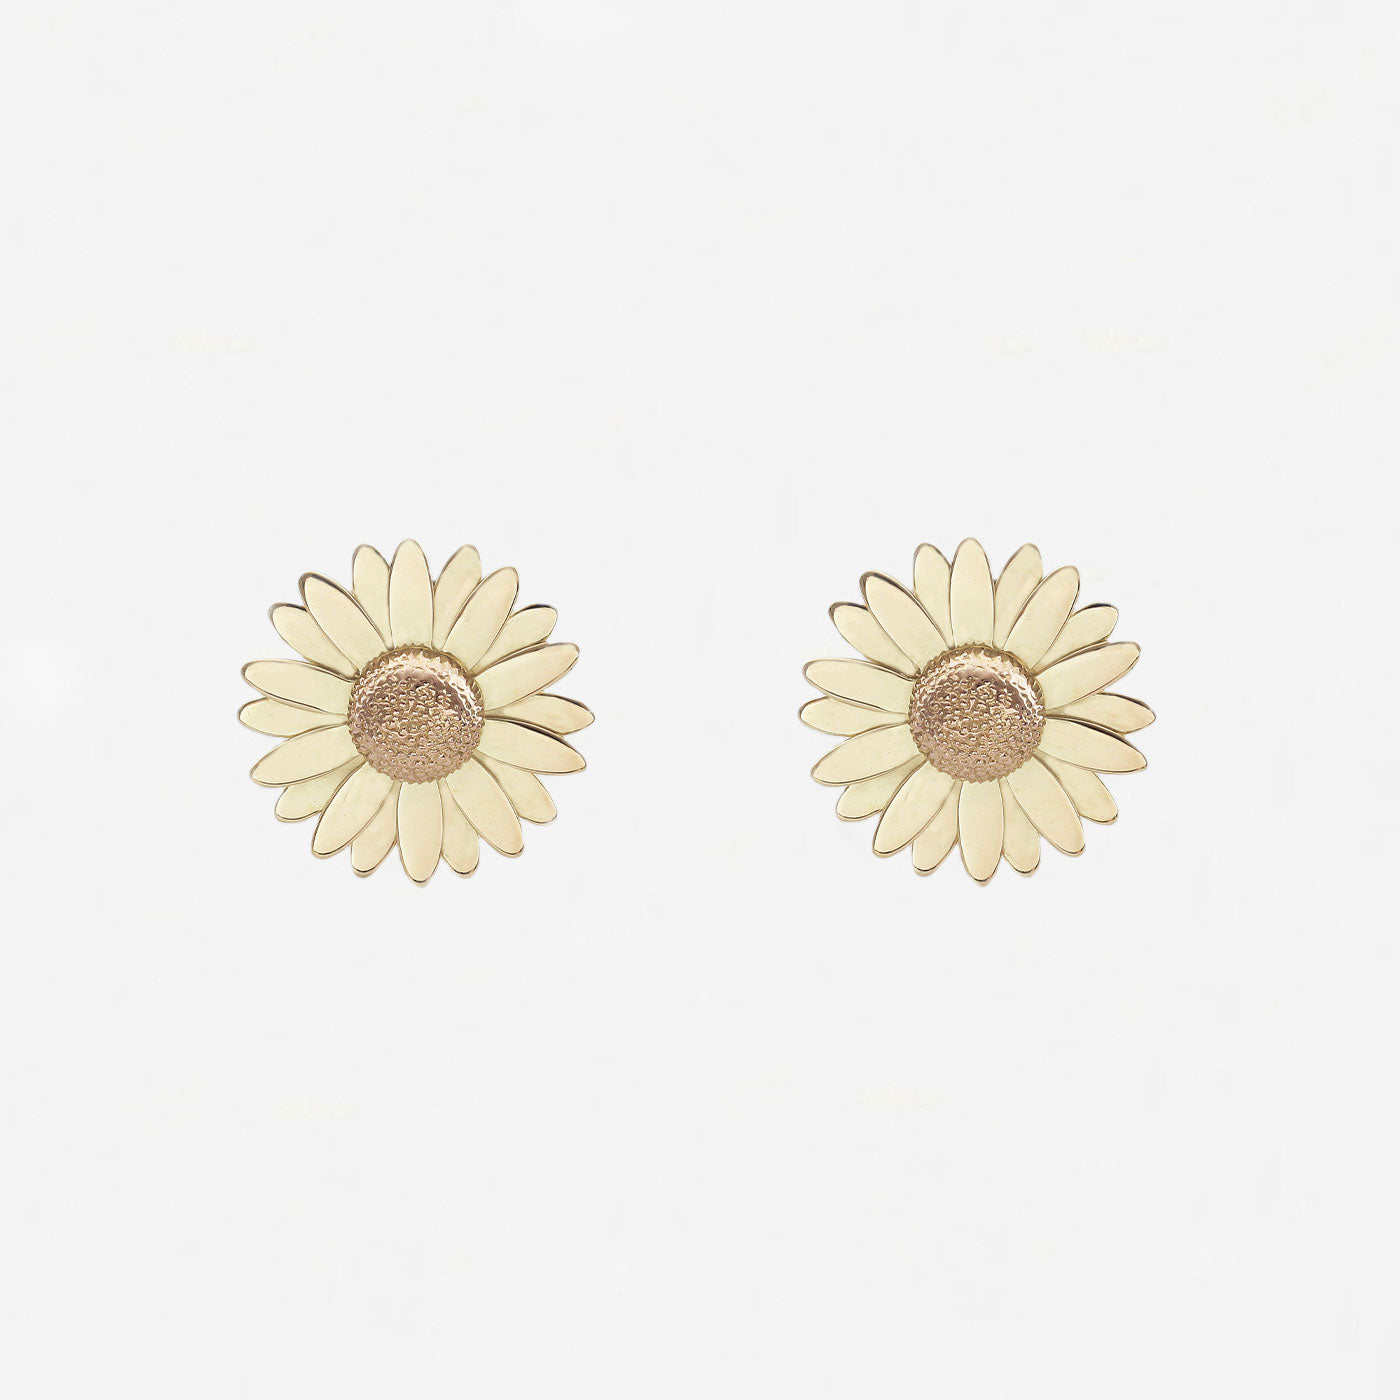 Daisy Earrings in 18ct Gold - Secondhand